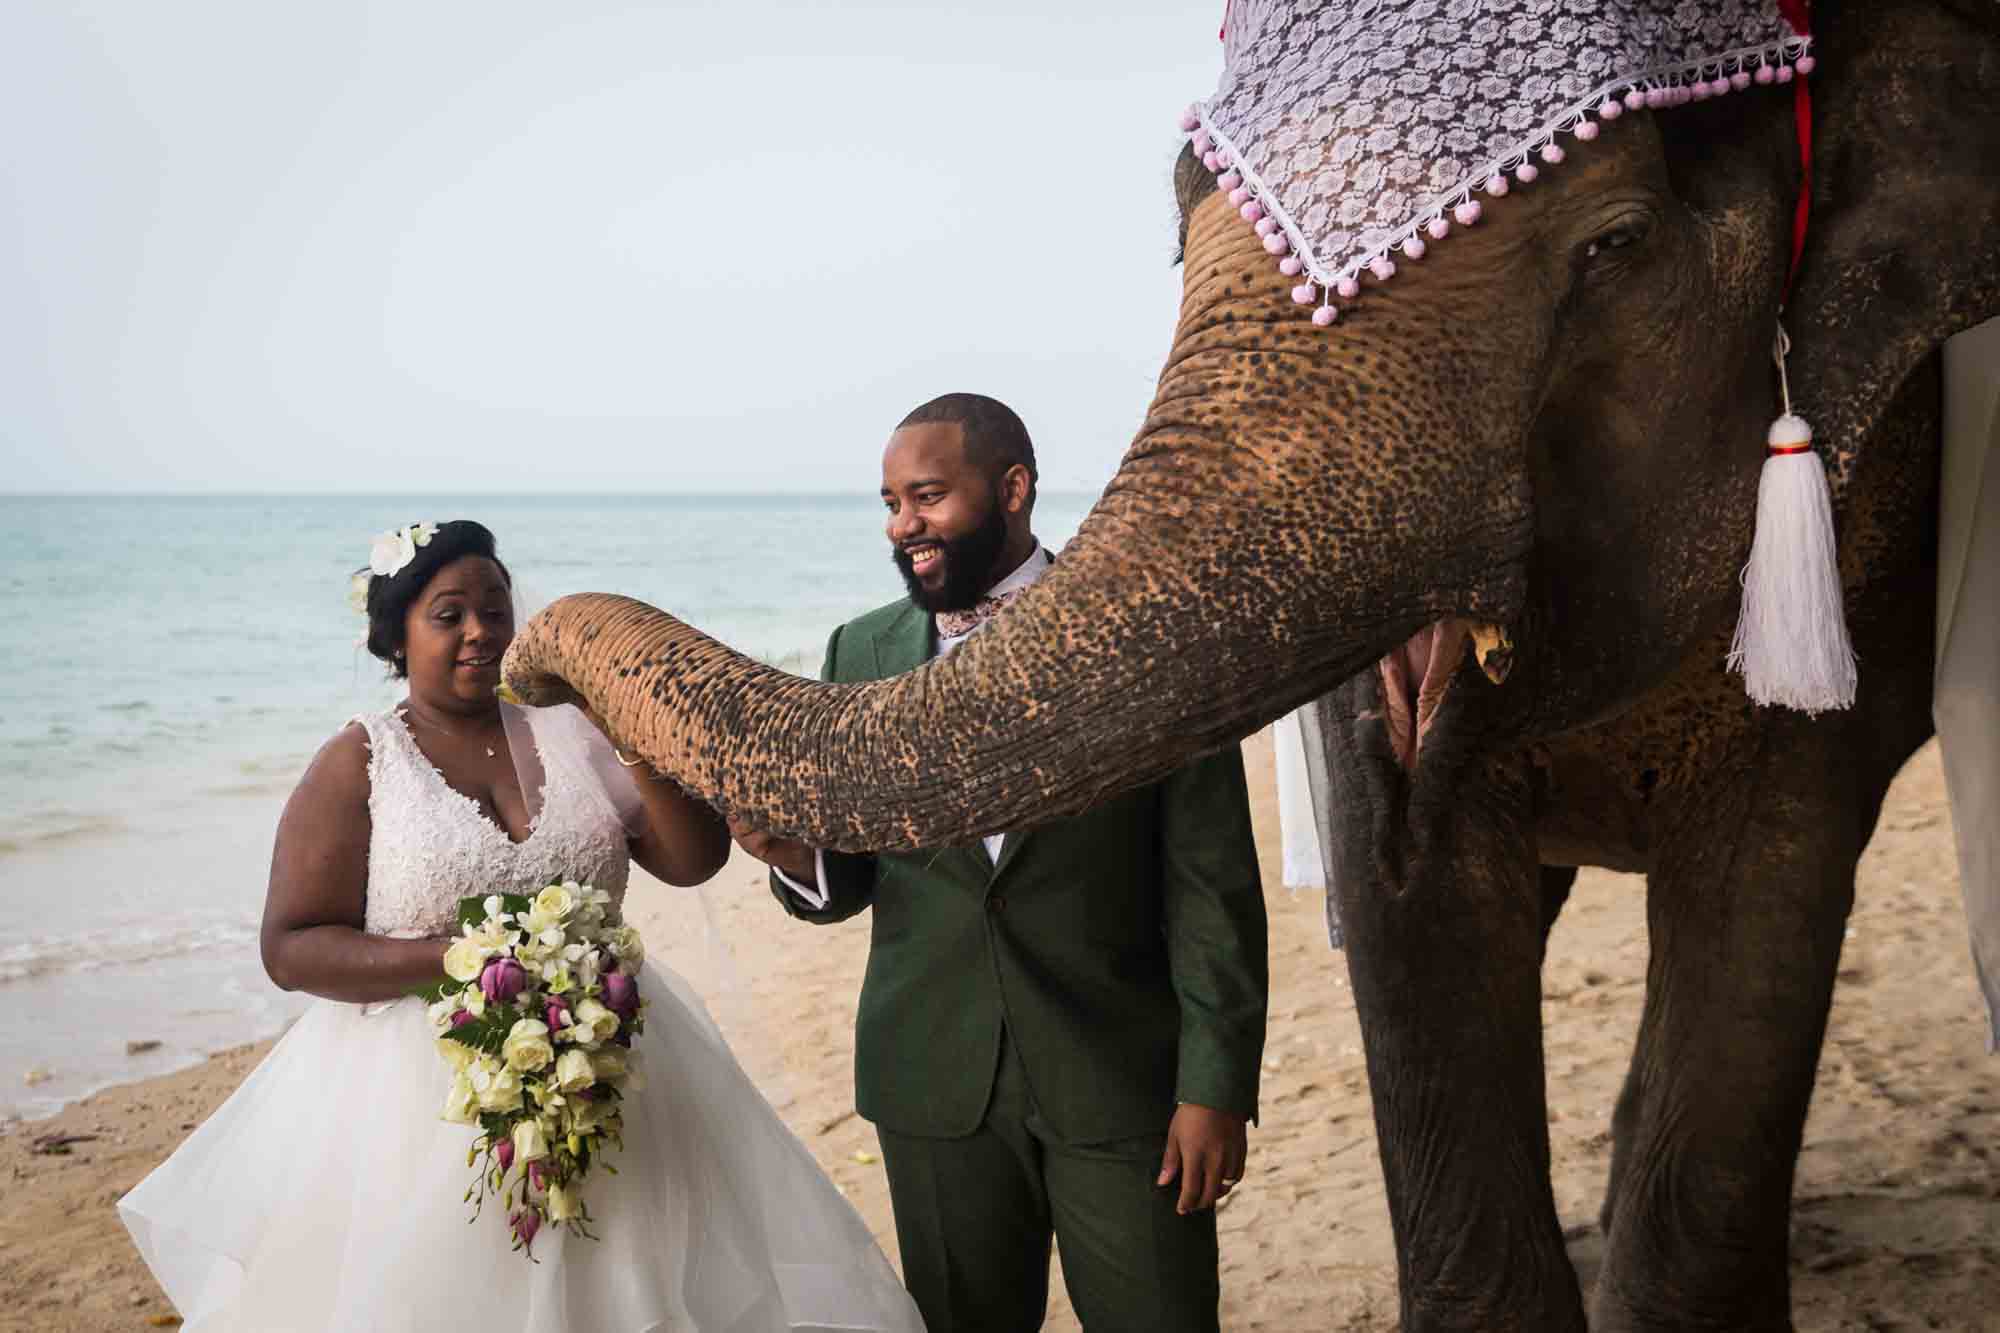 Bride and groom and elephant for an article on destination wedding photography tips